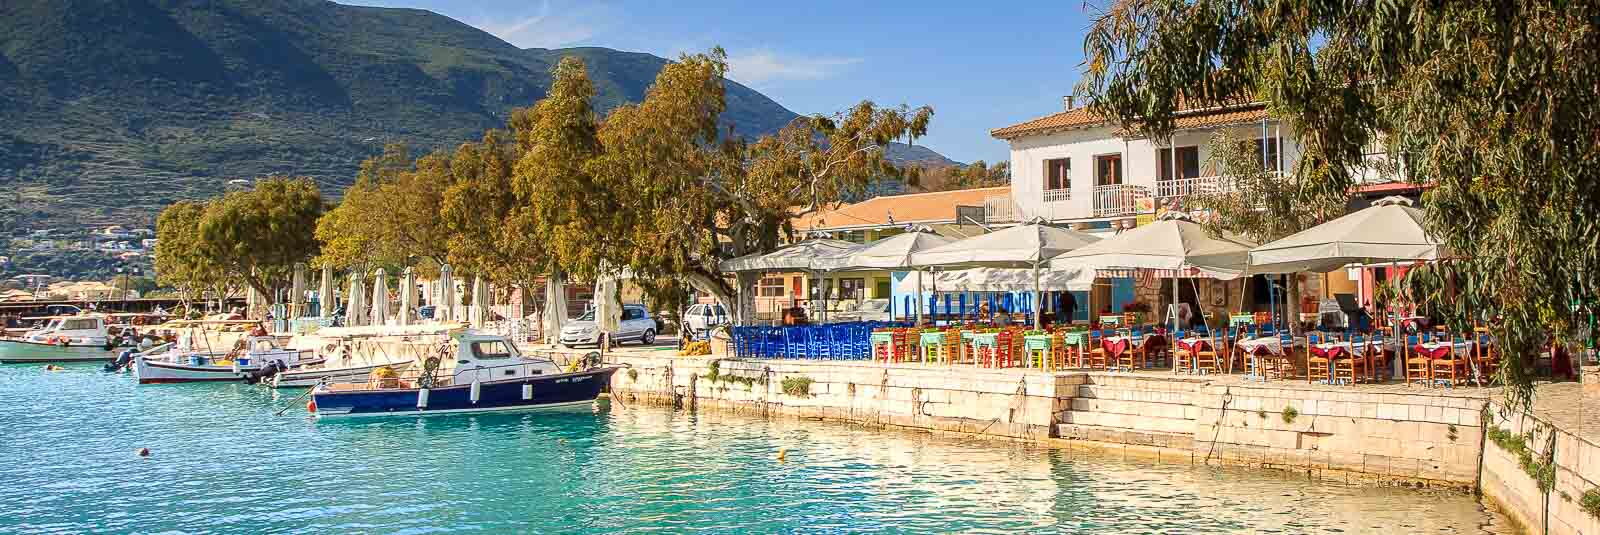 Vasiliki harbor withe some of its  Holiday homes and restaurants.